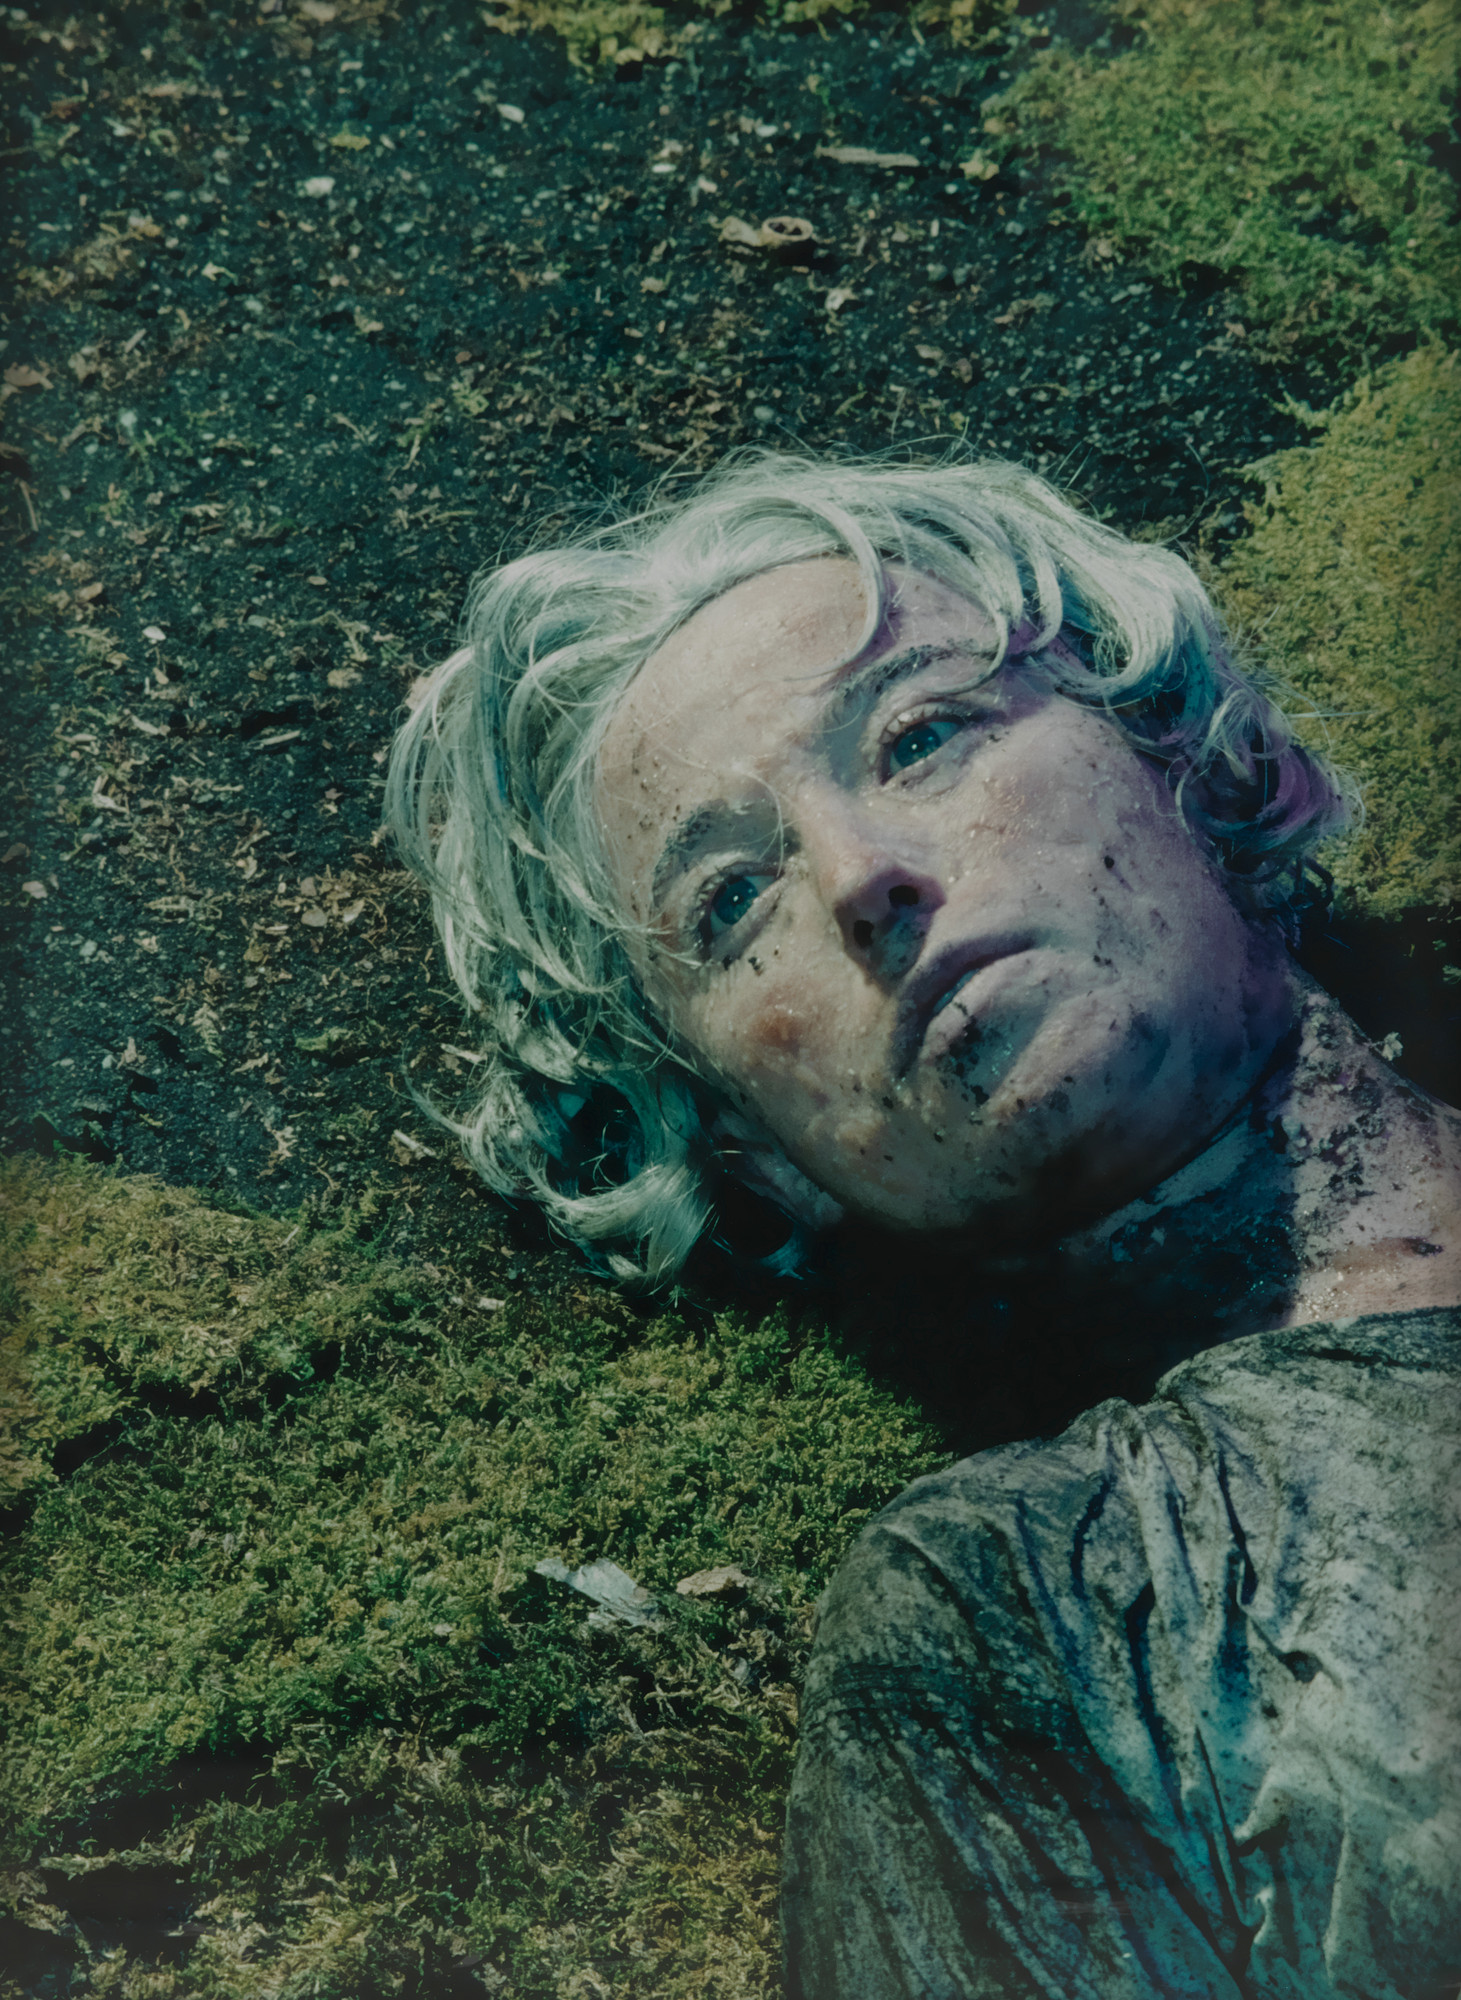 What Are Cindy Sherman's Wicked History Portraits?